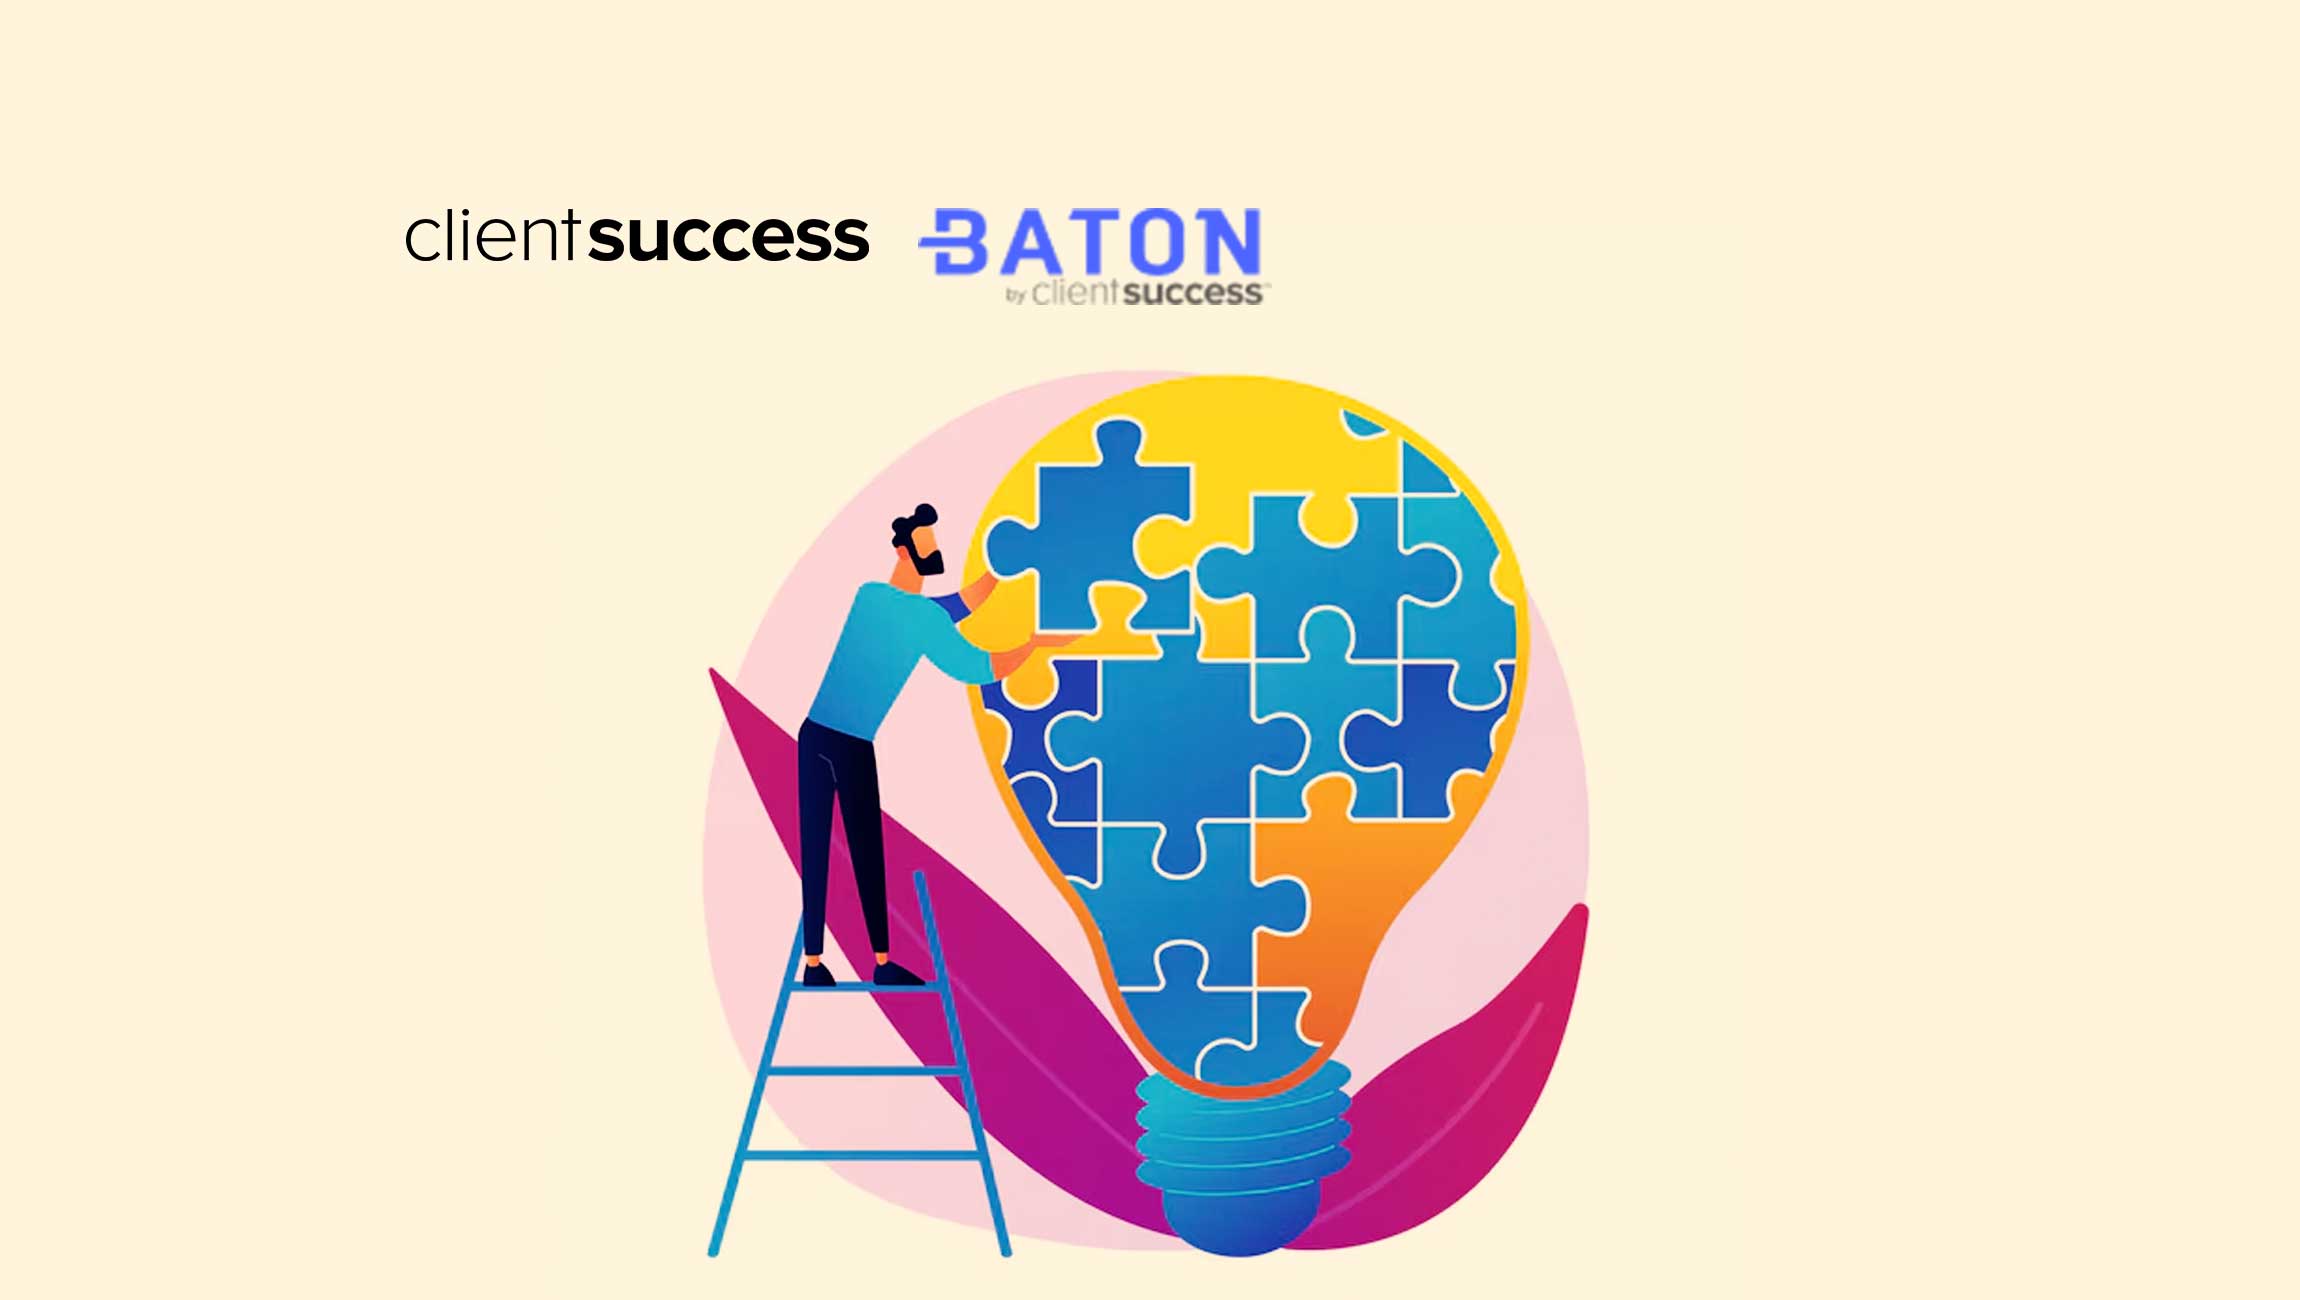 Clientsuccess Acquires Baton To Offer World-Class Onboarding & Implementation Solutions